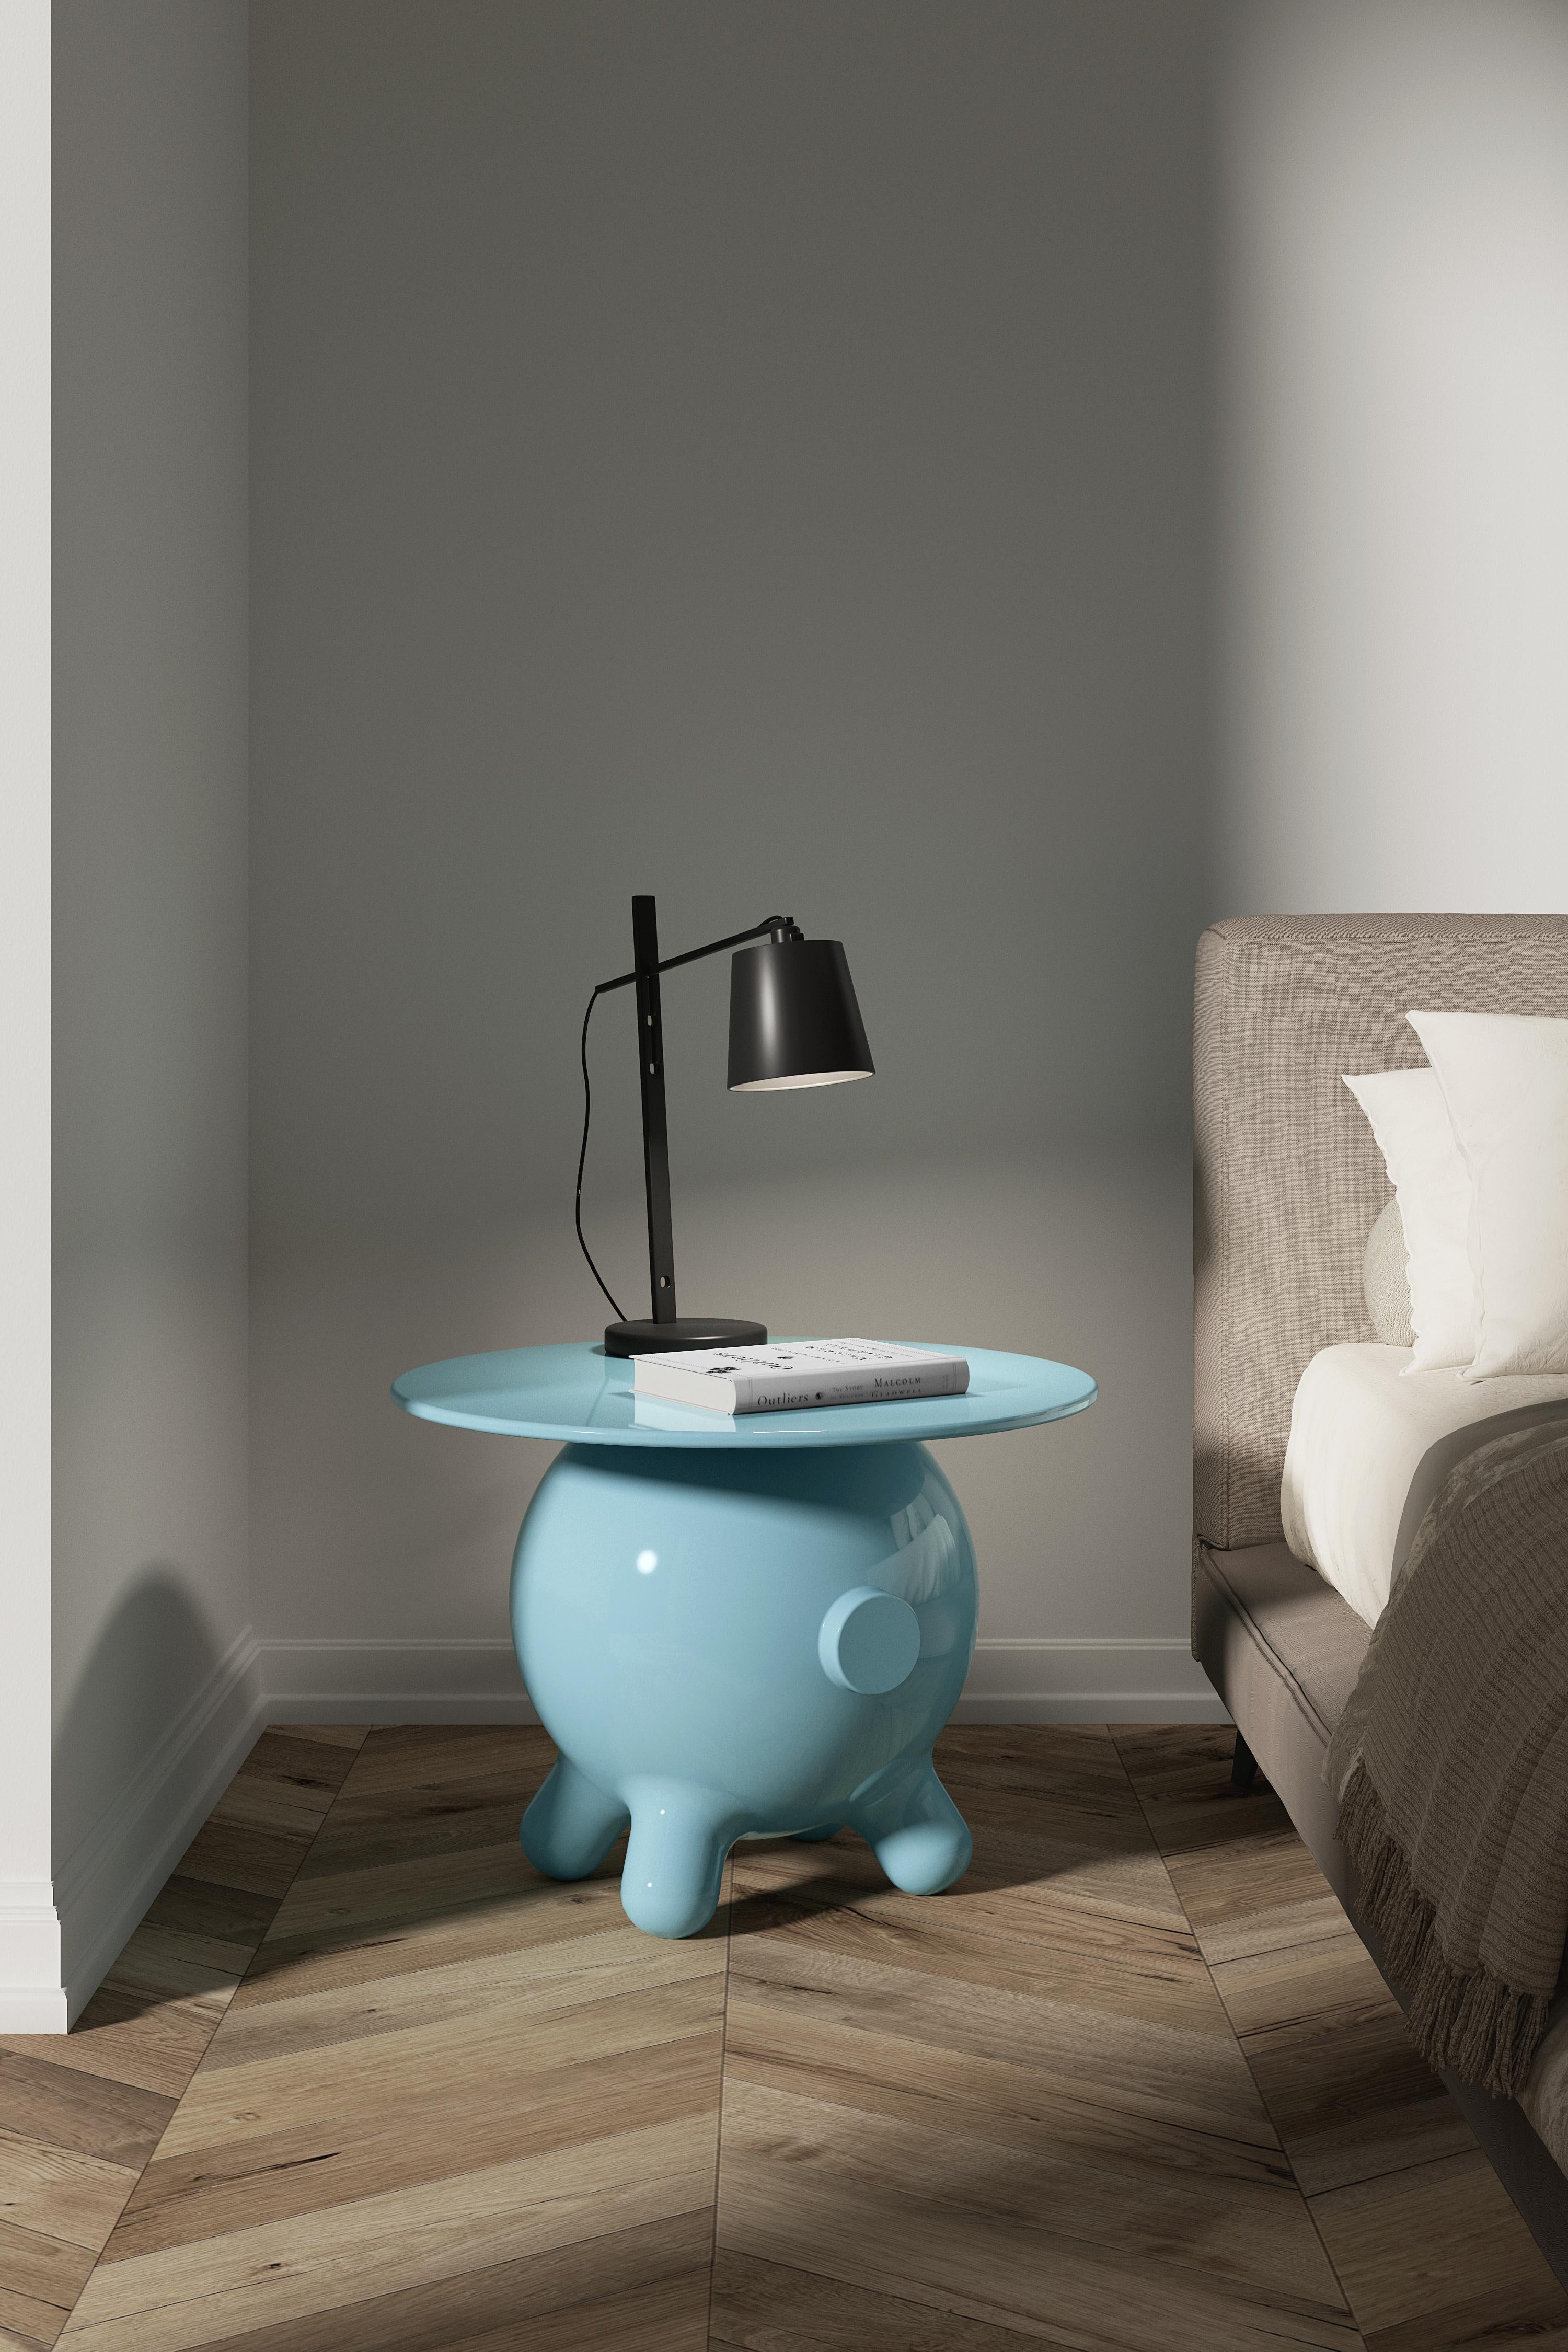 POGO is a charming piece that fills up the room with a youthful energy and a subtle bliss.
Side table large designed by Joel Escalona, made of fiberglass with high gloss finish in white, blue, red and black.

——

NONO is a Mexican design brand with